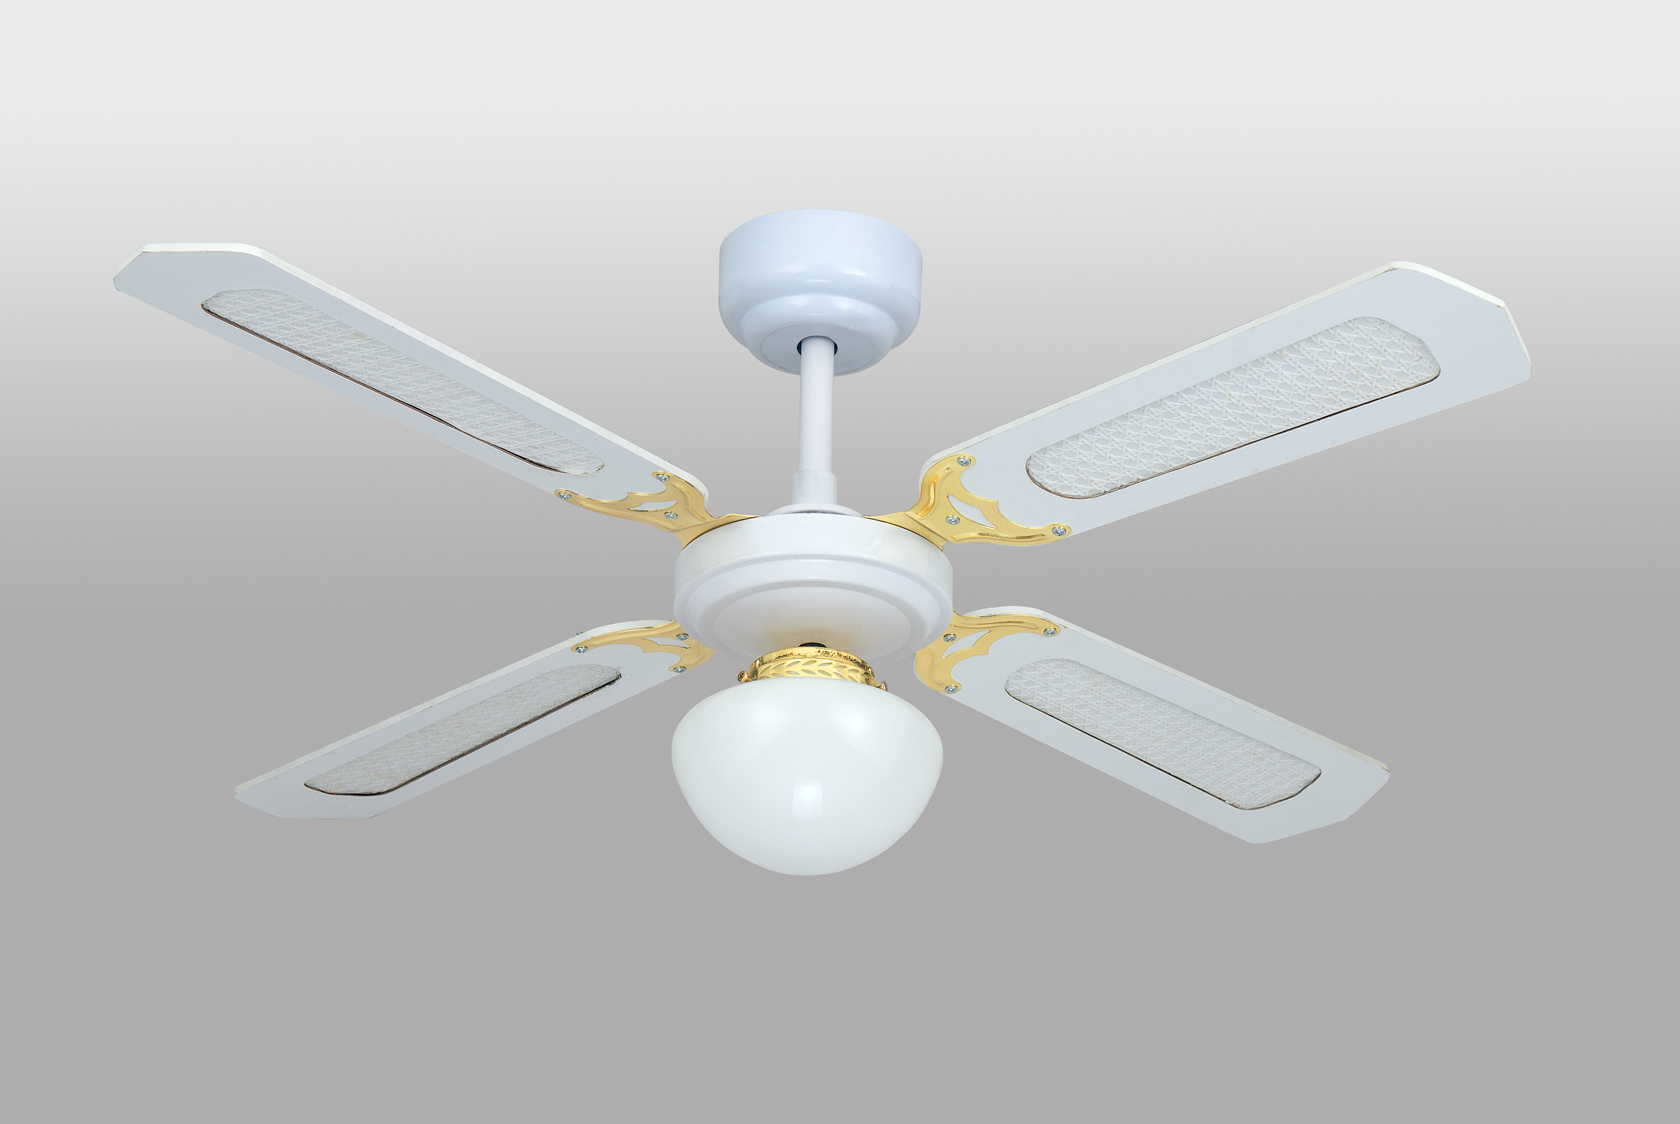 42 inch decorative ceiling fan industrial fan with DC Motor with light